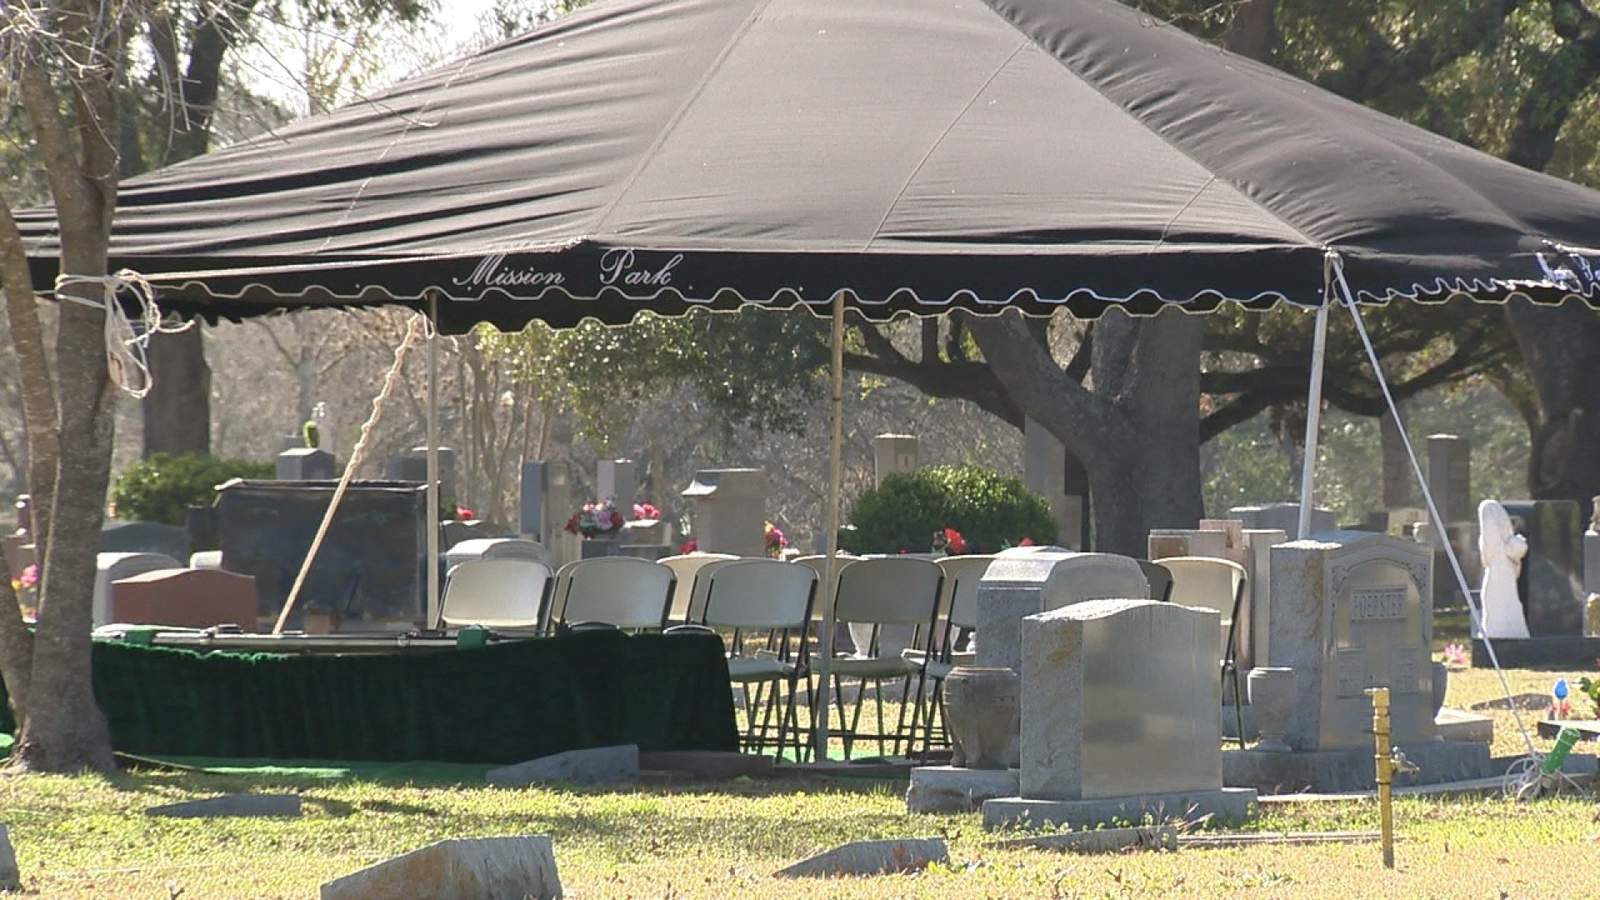 Lawsuits allege San Antonio funeral home switched bodies of two elderly women